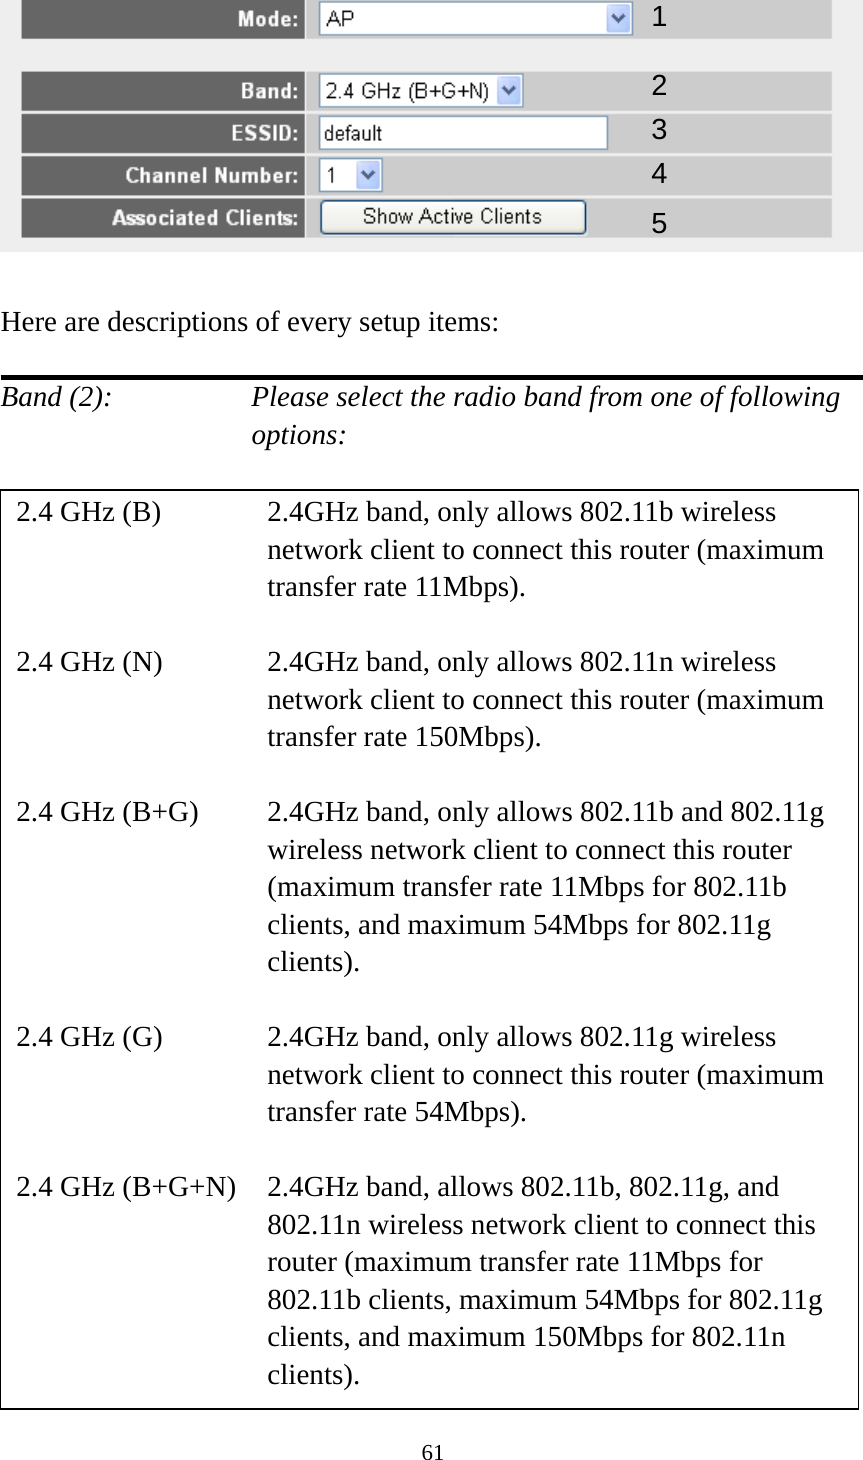 61   Here are descriptions of every setup items:  Band (2):    Please select the radio band from one of following options:                          12 34 2.4 GHz (B)  2.4GHz band, only allows 802.11b wireless network client to connect this router (maximum transfer rate 11Mbps).  2.4 GHz (N)  2.4GHz band, only allows 802.11n wireless network client to connect this router (maximum transfer rate 150Mbps).  2.4 GHz (B+G)    2.4GHz band, only allows 802.11b and 802.11g wireless network client to connect this router (maximum transfer rate 11Mbps for 802.11b clients, and maximum 54Mbps for 802.11g clients).  2.4 GHz (G)    2.4GHz band, only allows 802.11g wireless network client to connect this router (maximum transfer rate 54Mbps).  2.4 GHz (B+G+N)    2.4GHz band, allows 802.11b, 802.11g, and 802.11n wireless network client to connect this router (maximum transfer rate 11Mbps for 802.11b clients, maximum 54Mbps for 802.11g clients, and maximum 150Mbps for 802.11n clients). 5 